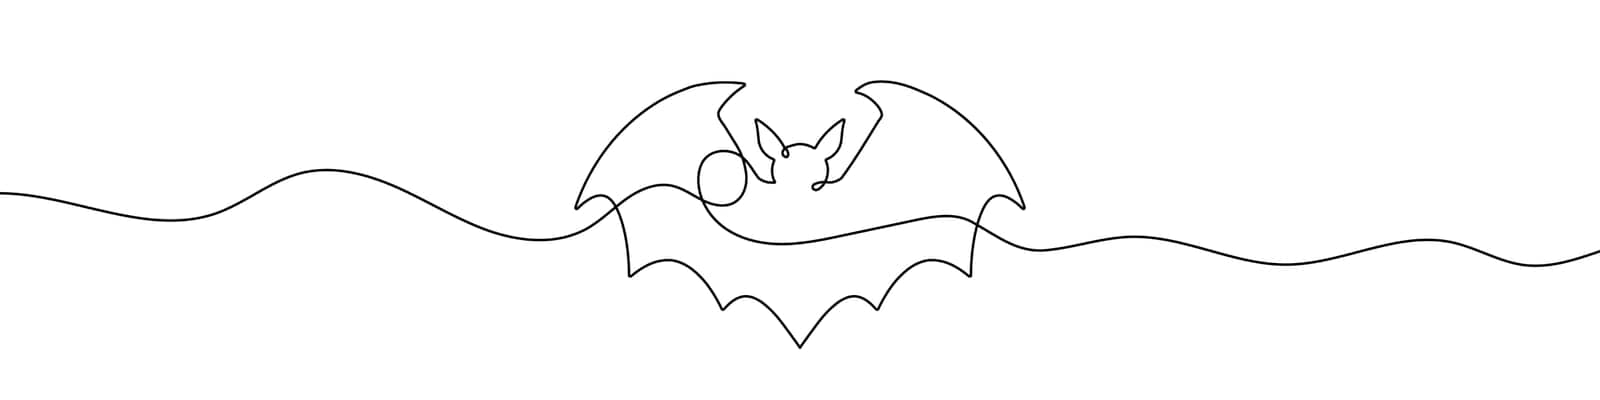 Continuous line drawing of bat. Bat continuous line icon. by Chekman